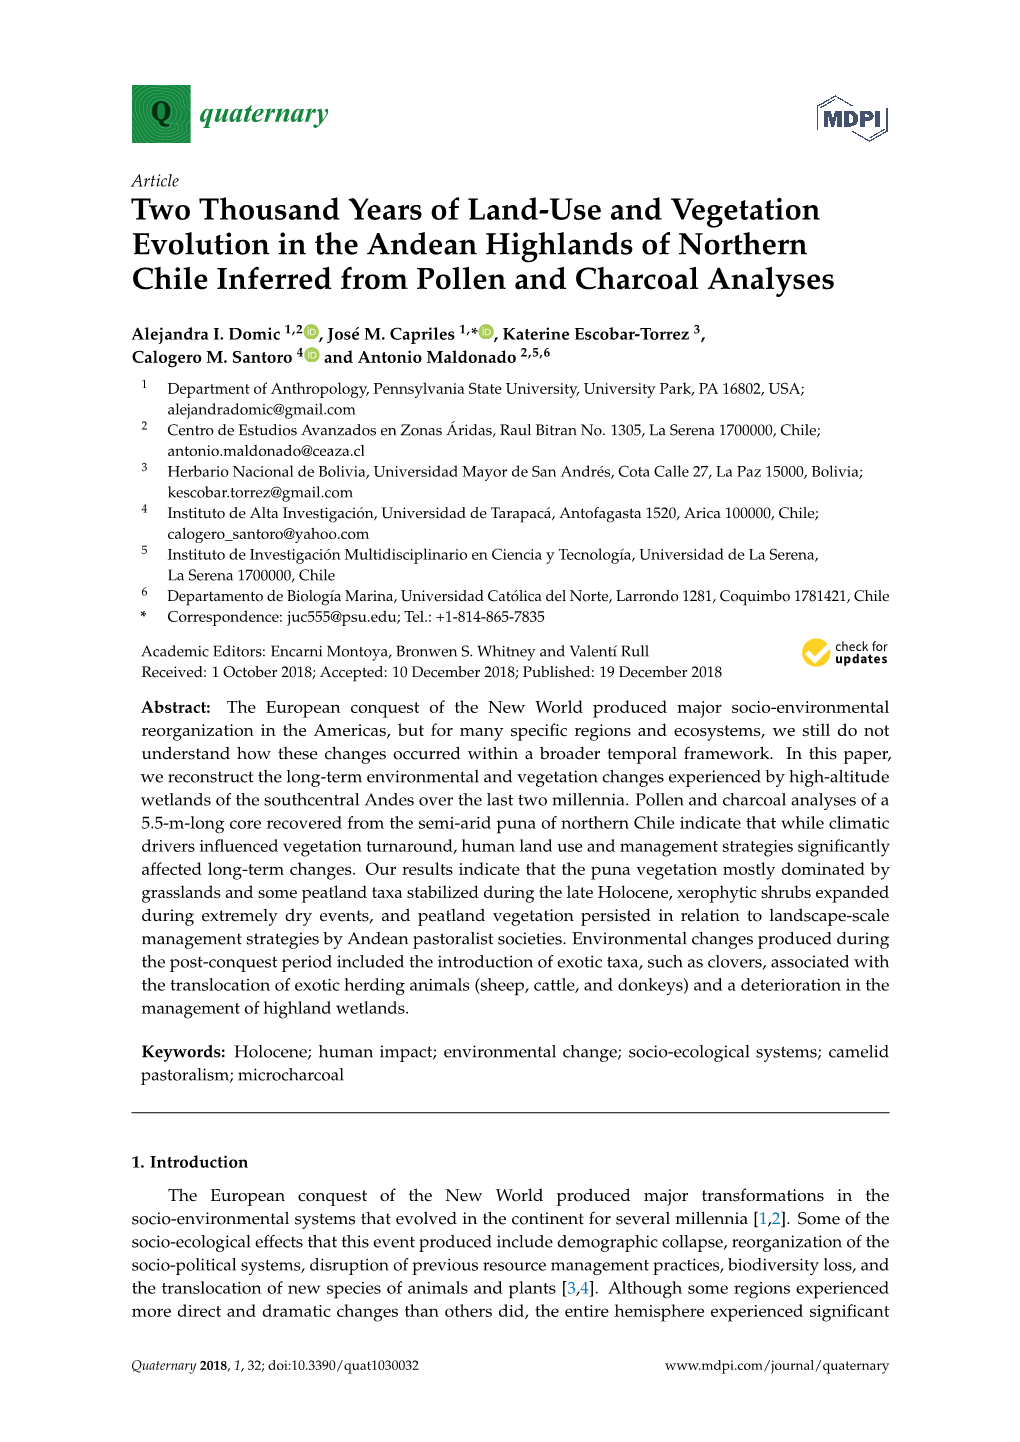 Two Thousand Years of Land-Use and Vegetation Evolution in the Andean Highlands of Northern Chile Inferred from Pollen and Charcoal Analyses